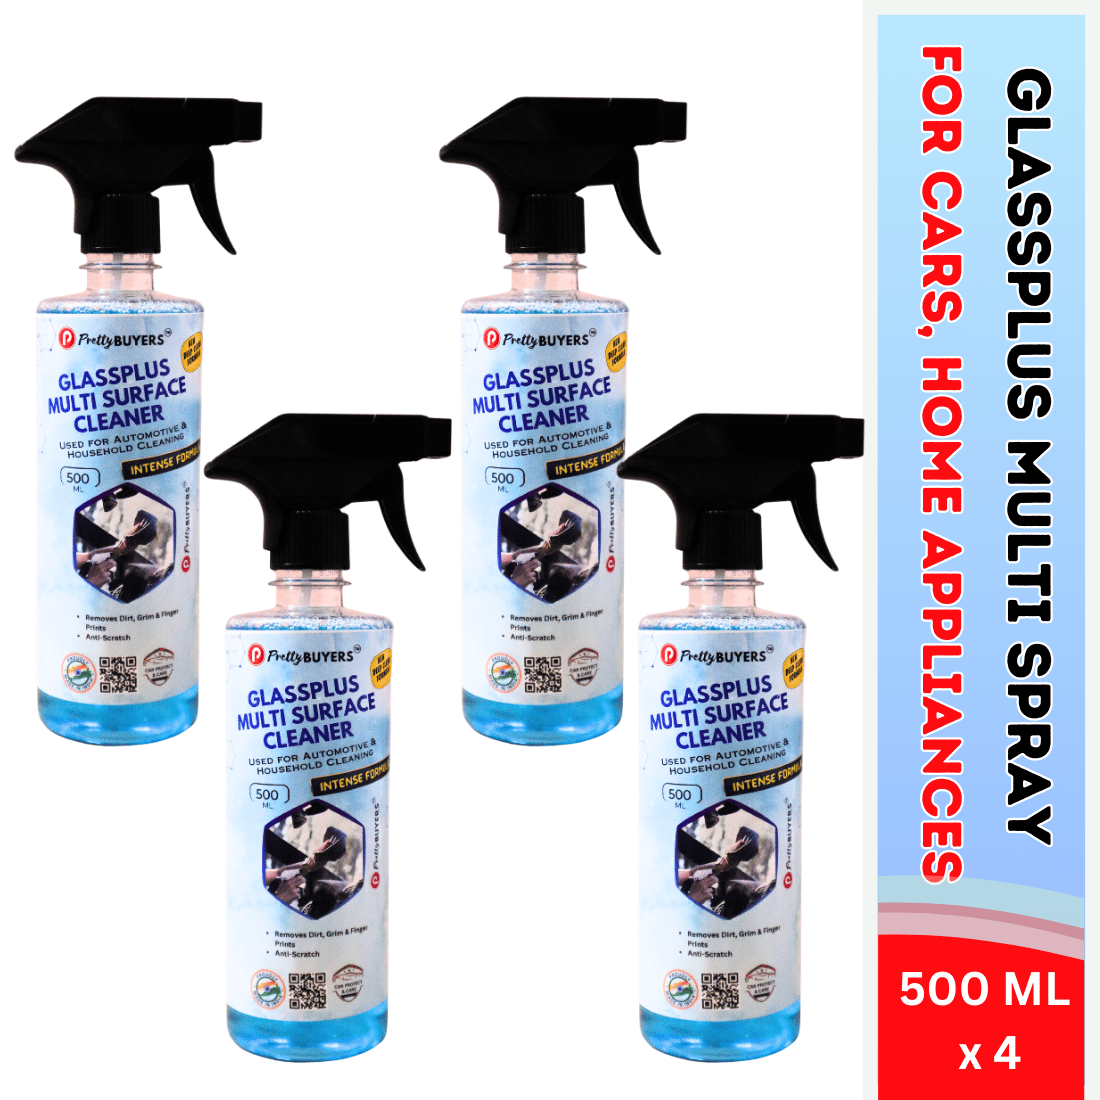 PrettyBUYERS Glass and Surface Cleaner Liquid Spray - 500 ML | All-Purpose Glass Cleaner for Car, Kitchen, and Home Surfaces | Multi-Surface Cleaner Pack Of 4